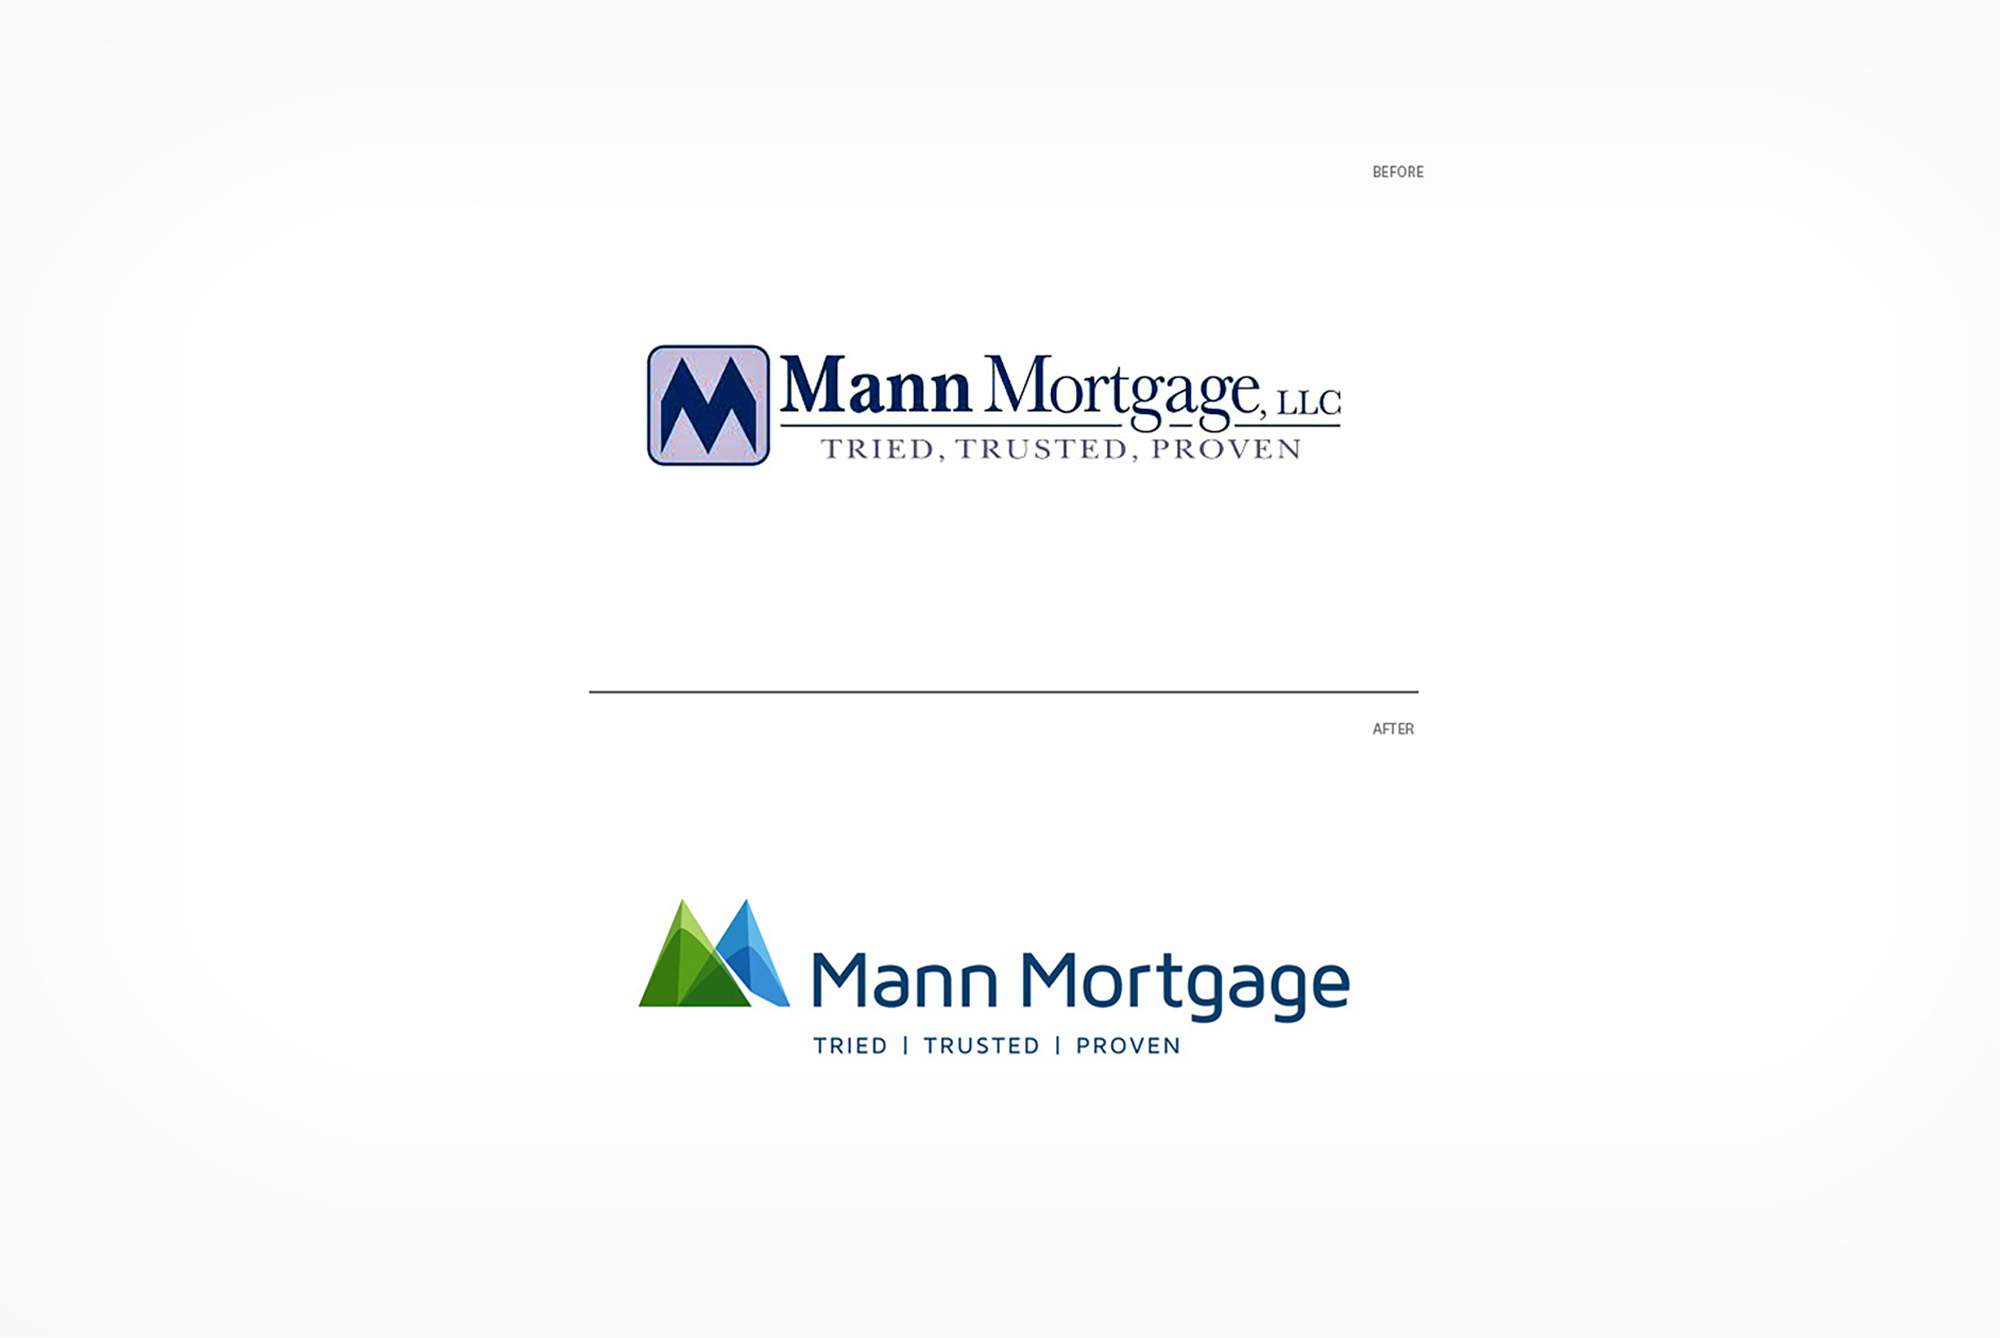 Mann Mortgage brand logo redsign before and after.